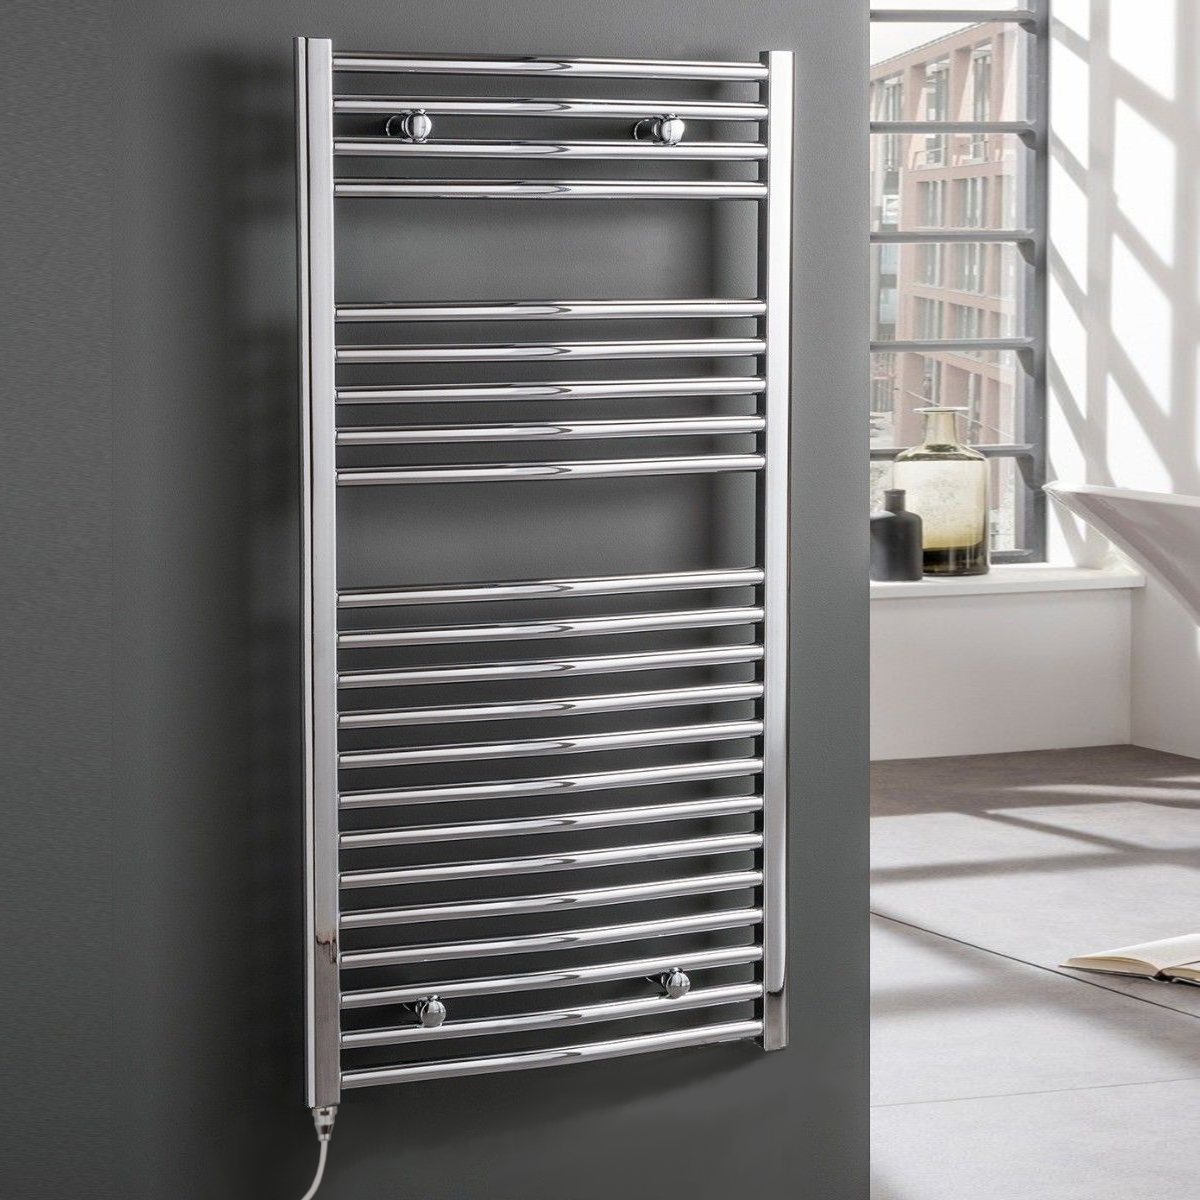 Bray Curved Heated Towel Rail / Warmer / Radiator, Chrome – Electric Best Quality & Price, Energy Saving / Economic To Run Buy Online From Adax SolAire UK Shop